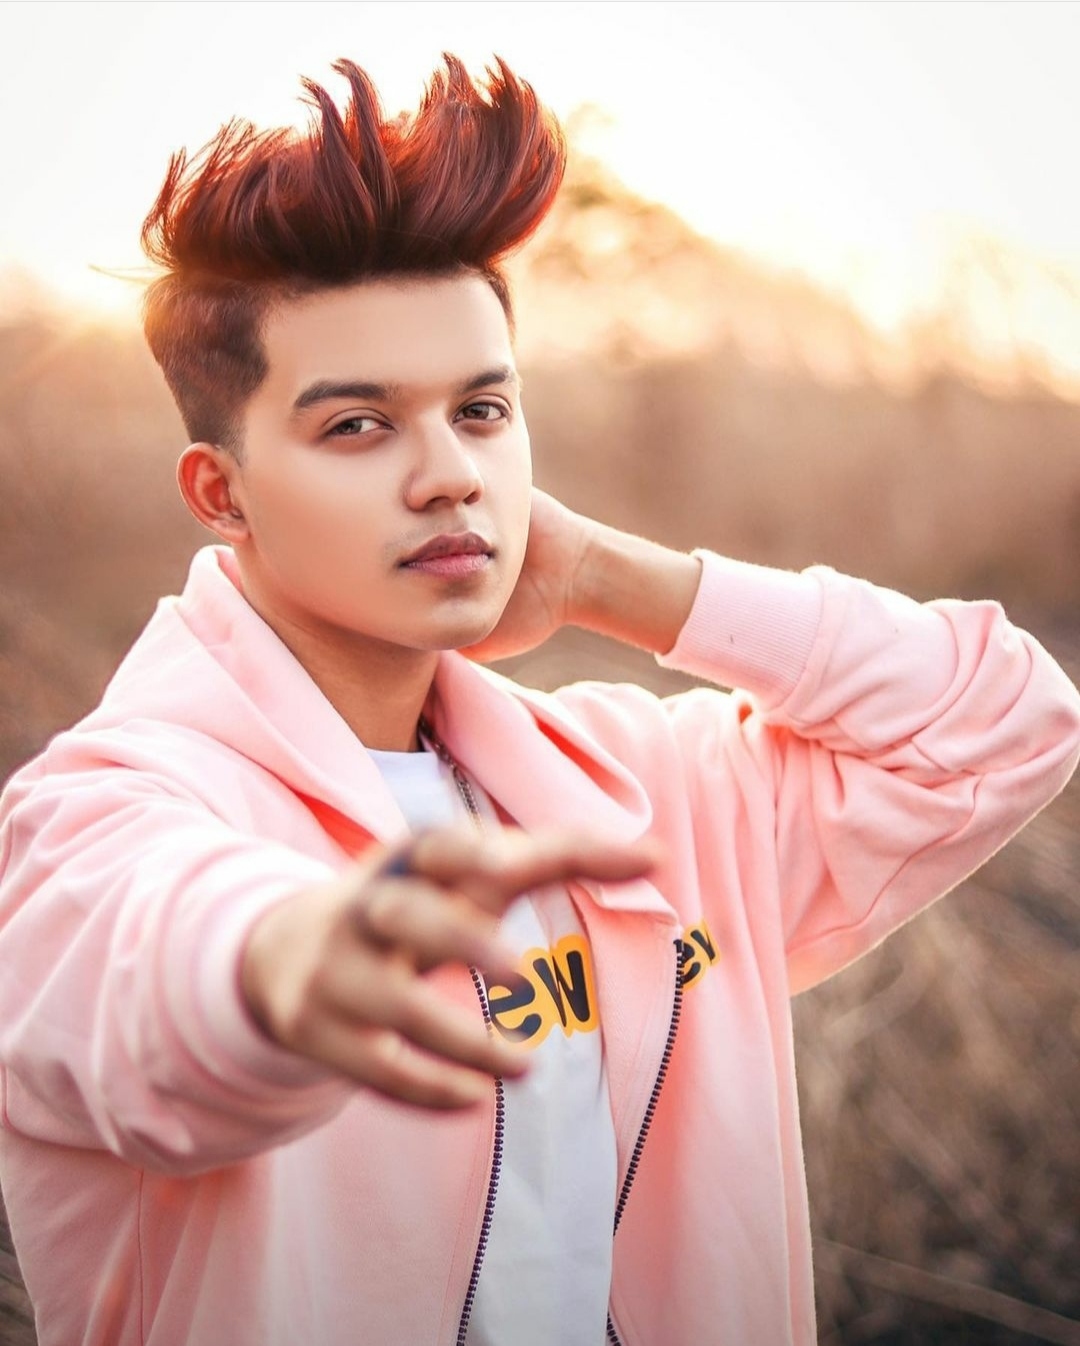 Boys Out There! Style Your Hair & Dye Your Hair Just Like Riyaz Aly To  Impress Your Girl